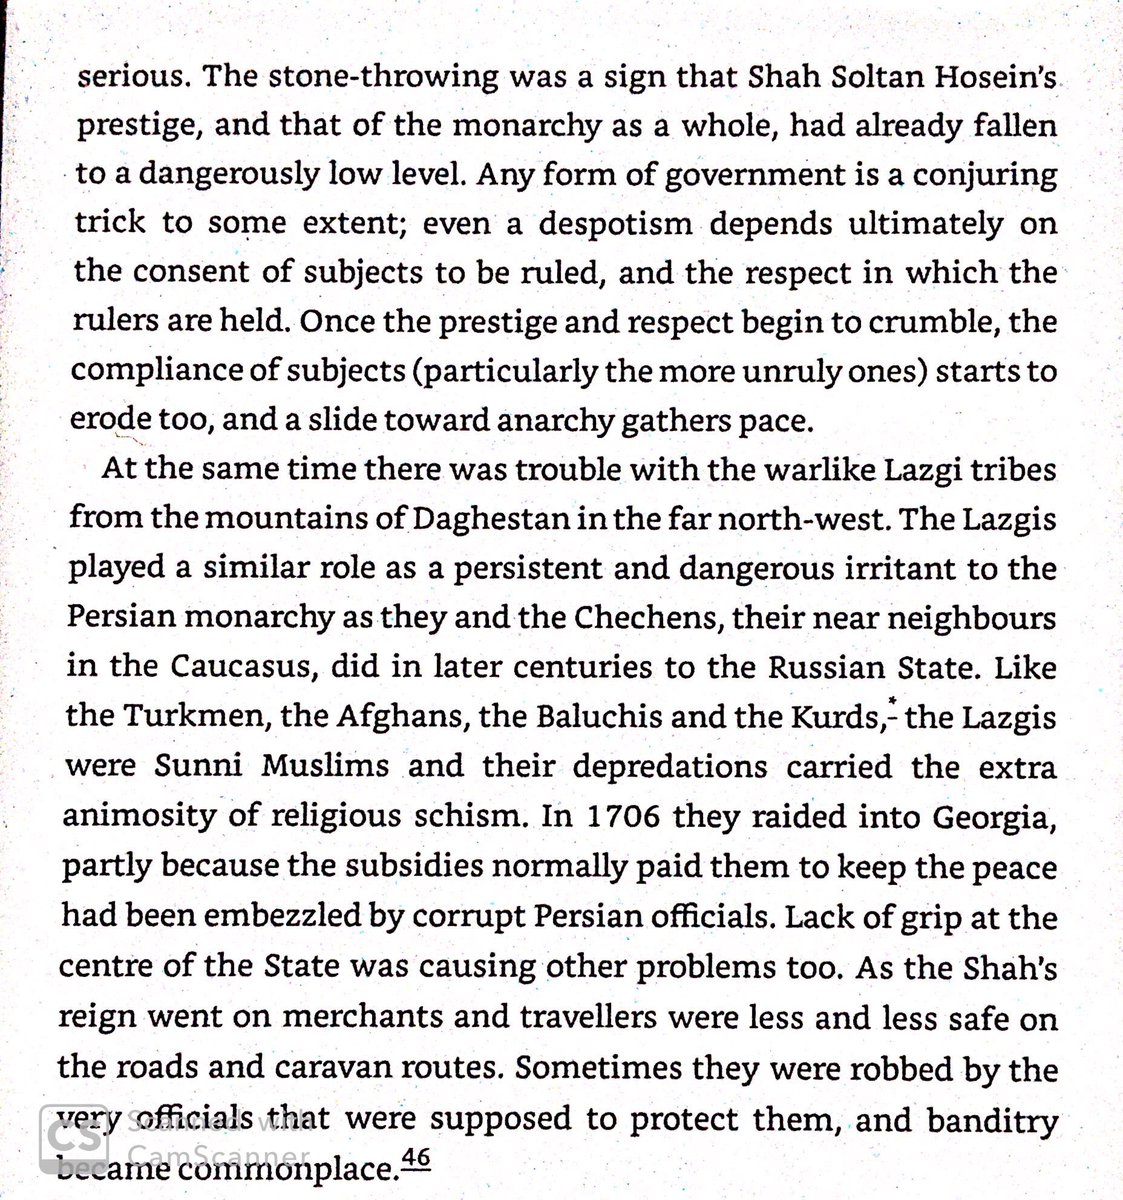 Safavids suffered from serious urban unrest by 1710. Lezgin, Baluchi, & Afghan tribesmen raided Iran. Naturally, central authority declined & local leaders asserted themselves.